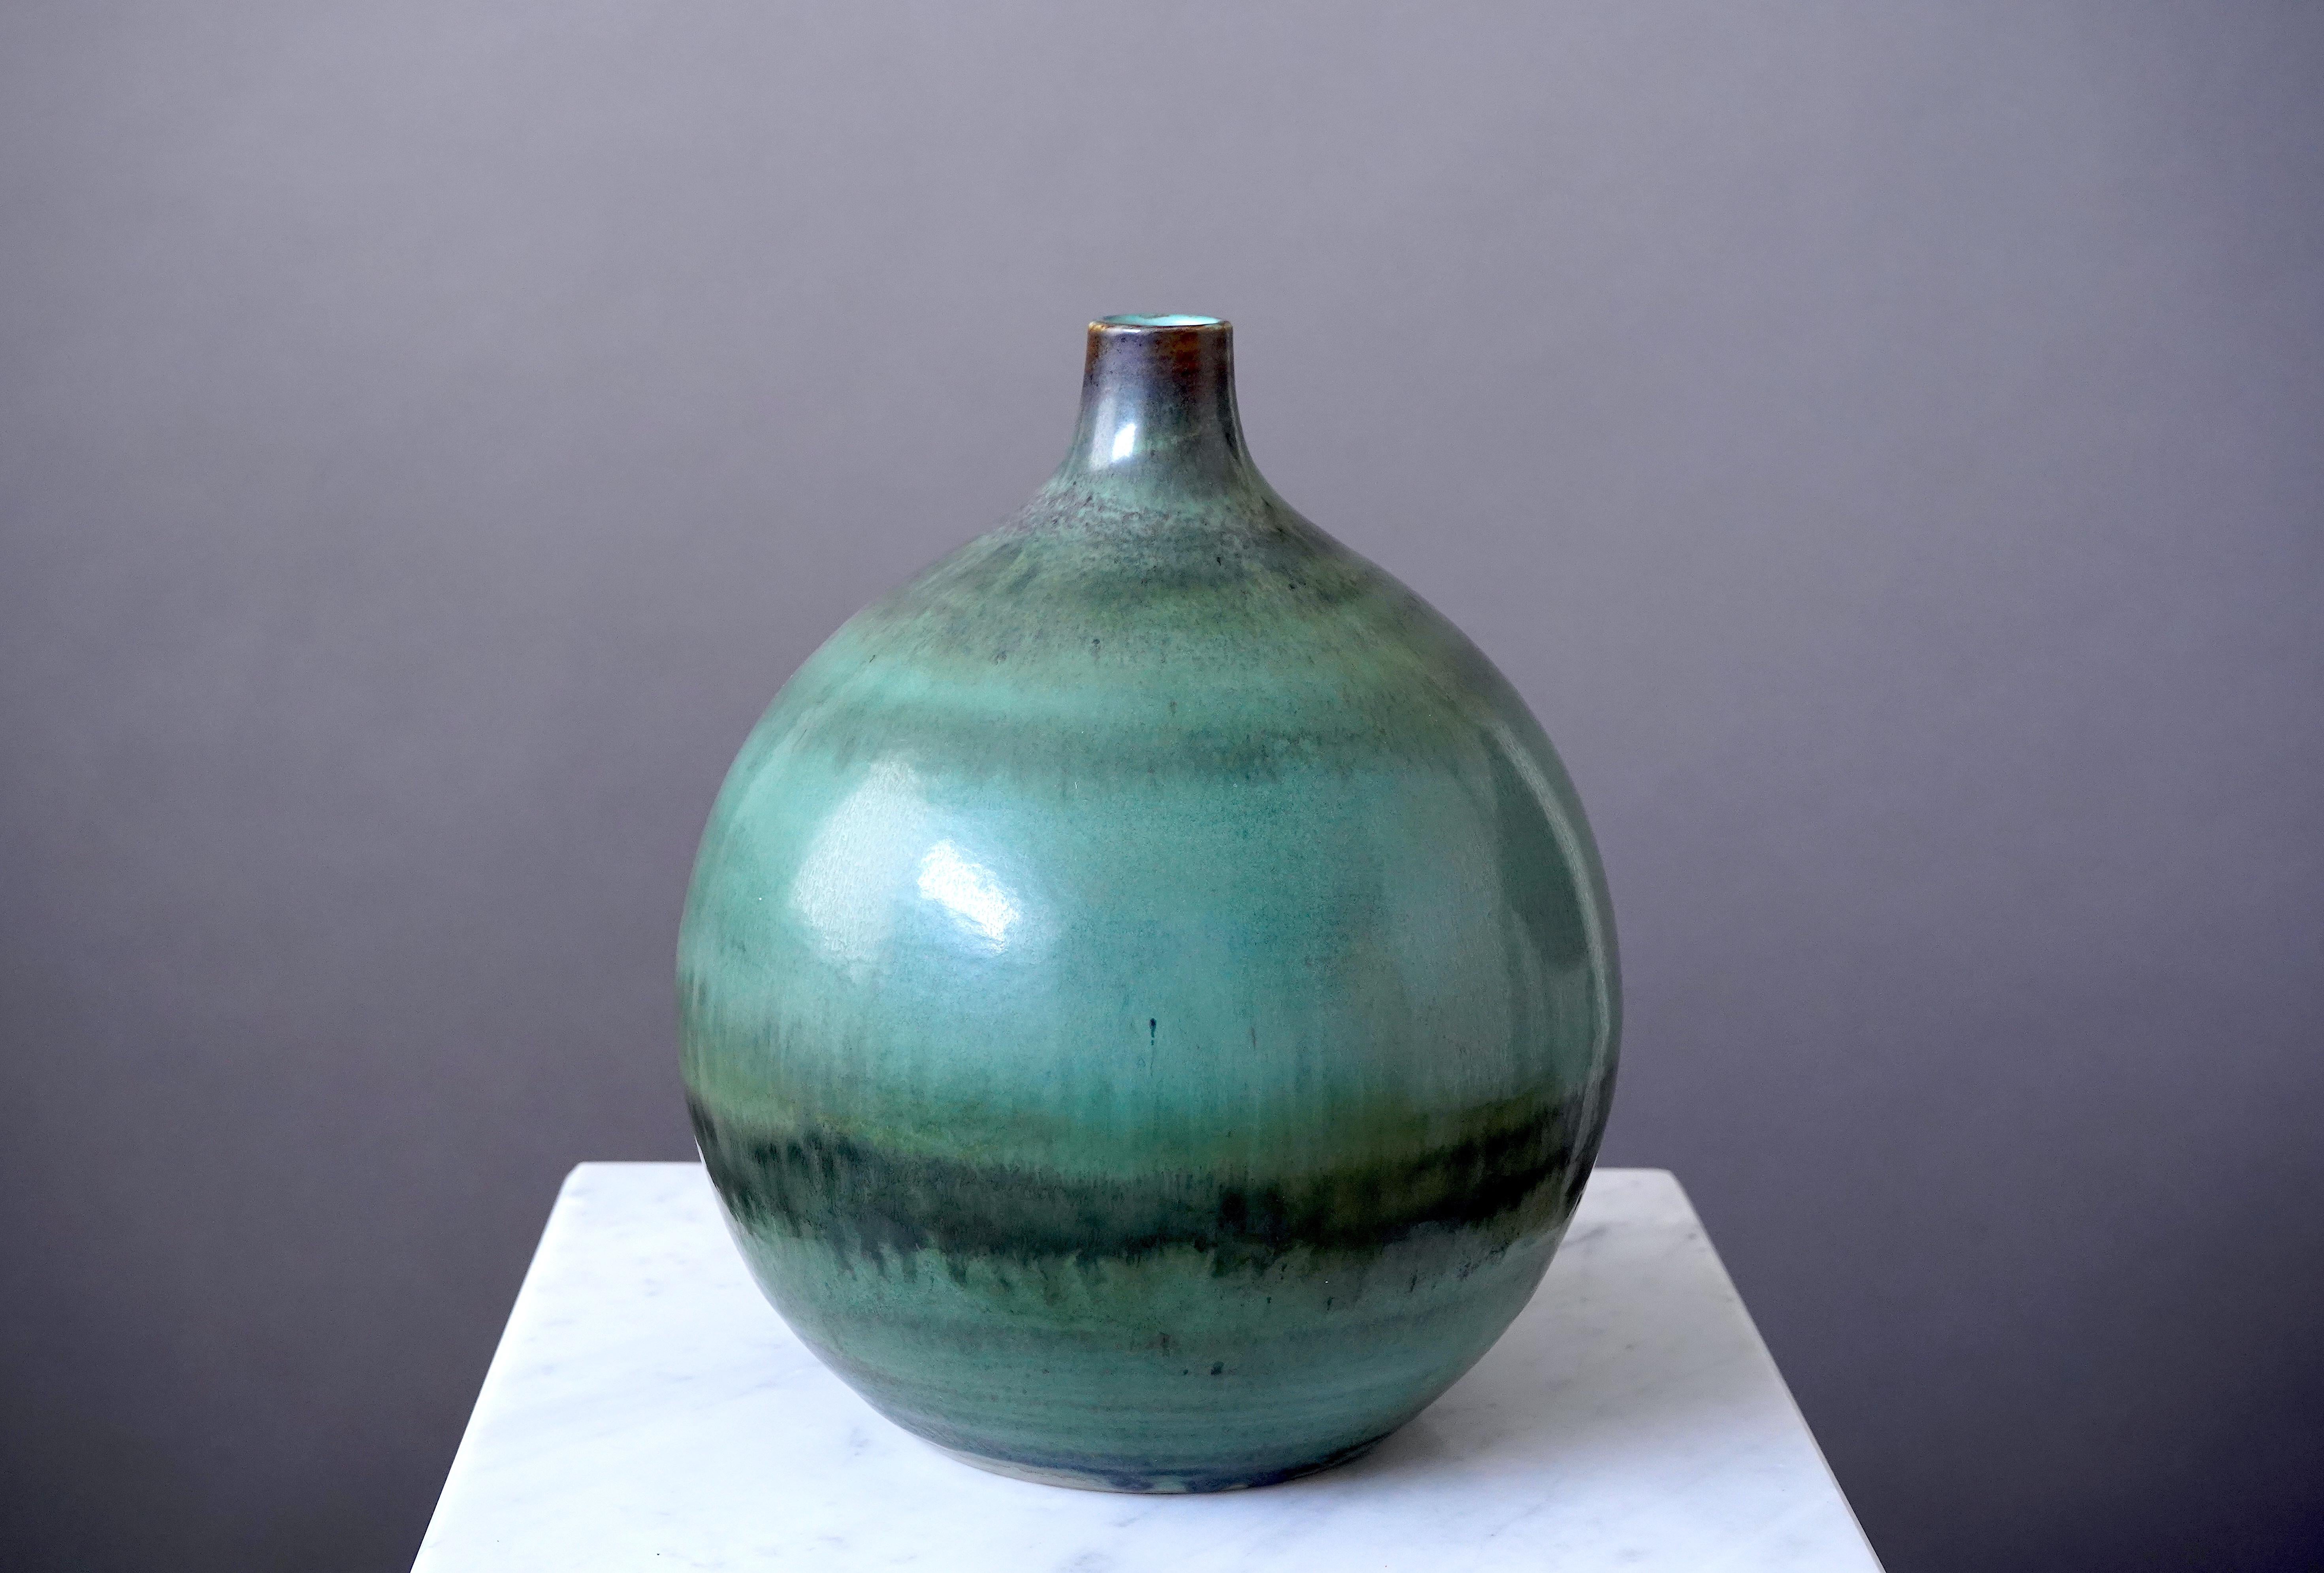 Beautiful and rare vase designed by Gertrud Lönegren.
This studio piece was created at Rorstrand in Sweden between 1936-41.

Excellent condition. Beautiful glaze. 
Impressed 'Rörstrand / Lönegren / Sweden / L 367 / HANDDREJAD'.

Gertrud